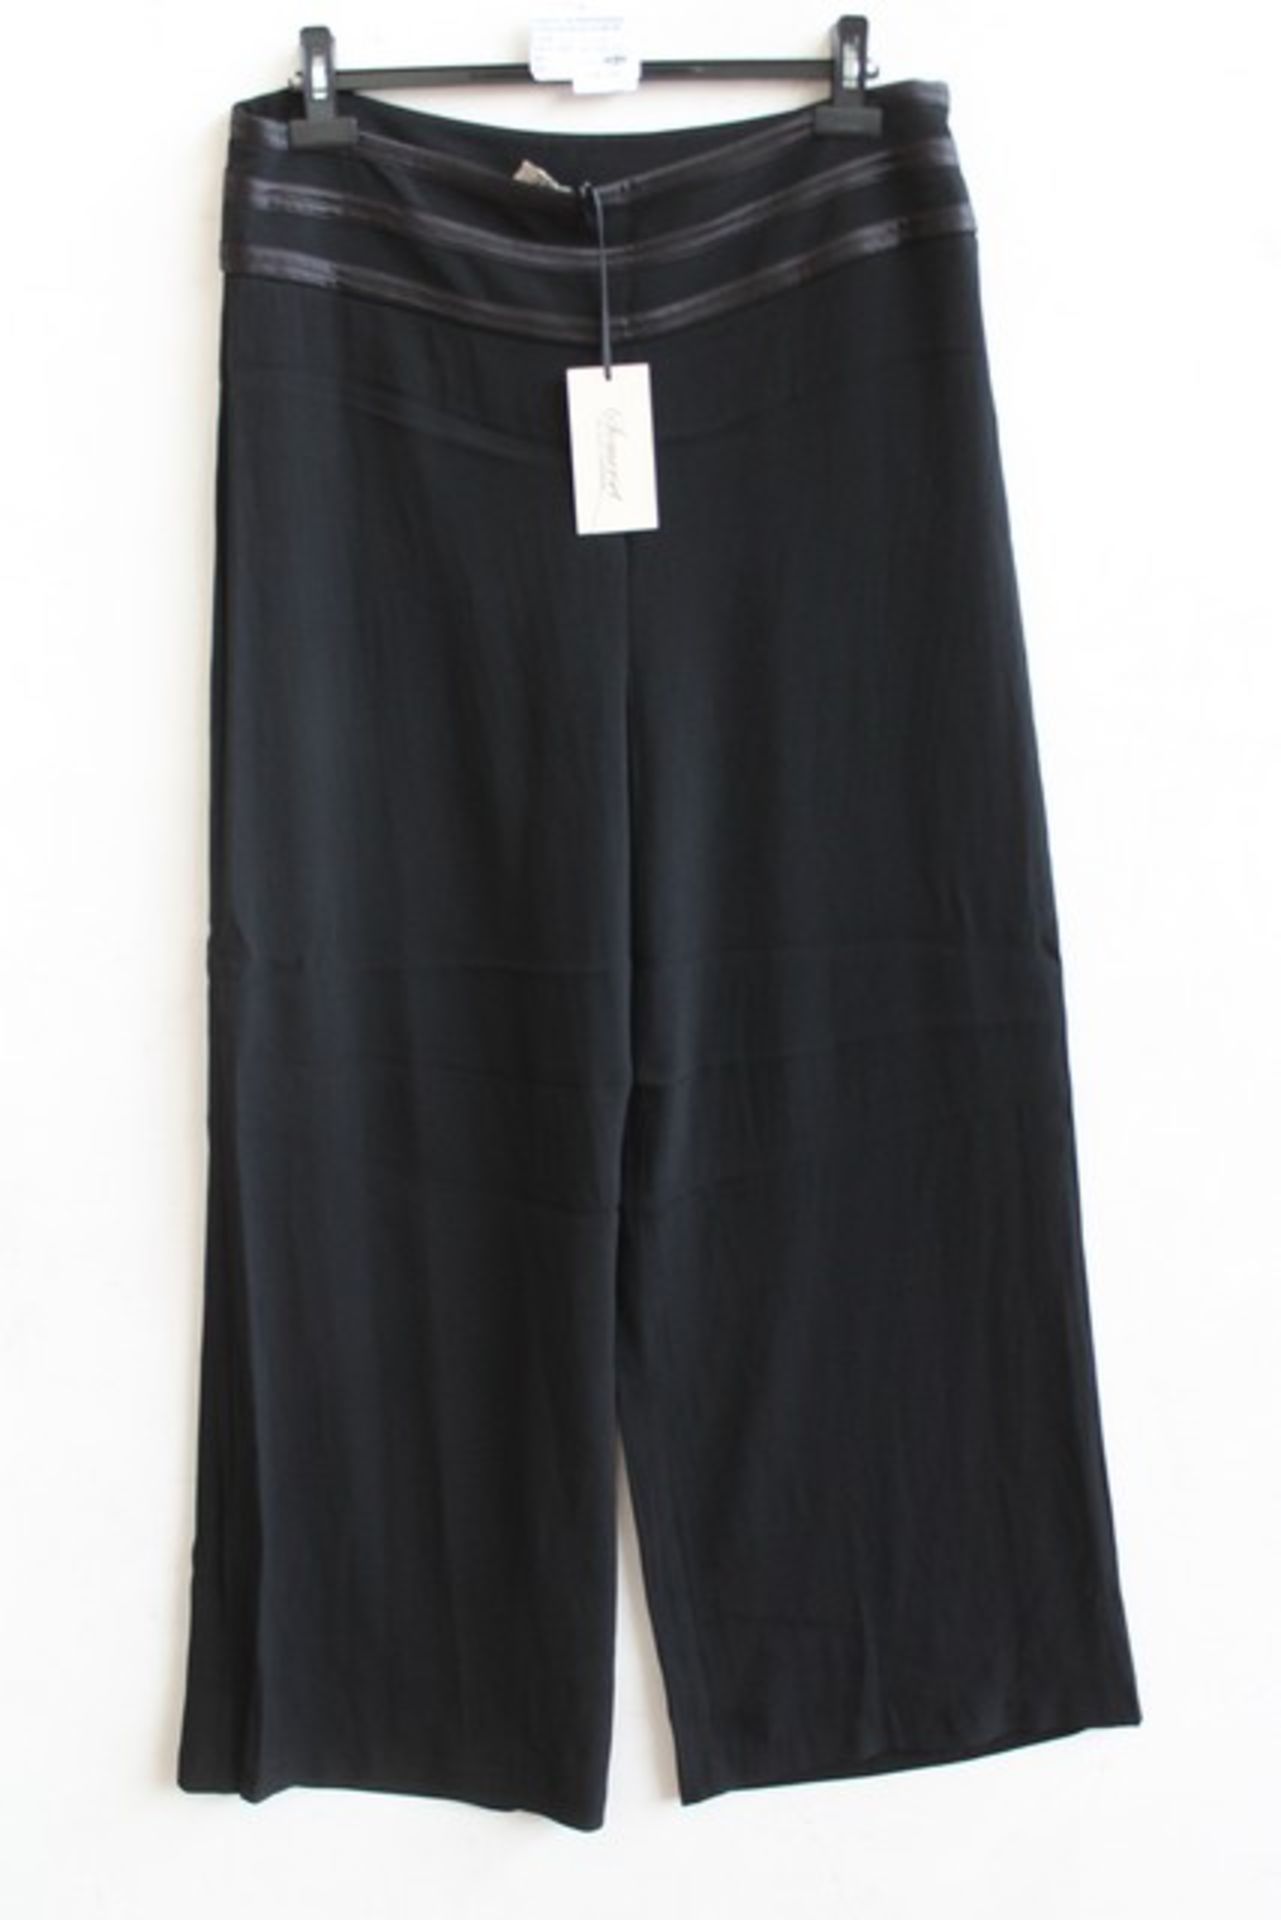 ONE BRAND NEW PAIR OF SOMERSET BY ALICE TEMPERLEY TUX TROUSERS IN BLACK SIZE 18 RRP £110 (DS RES